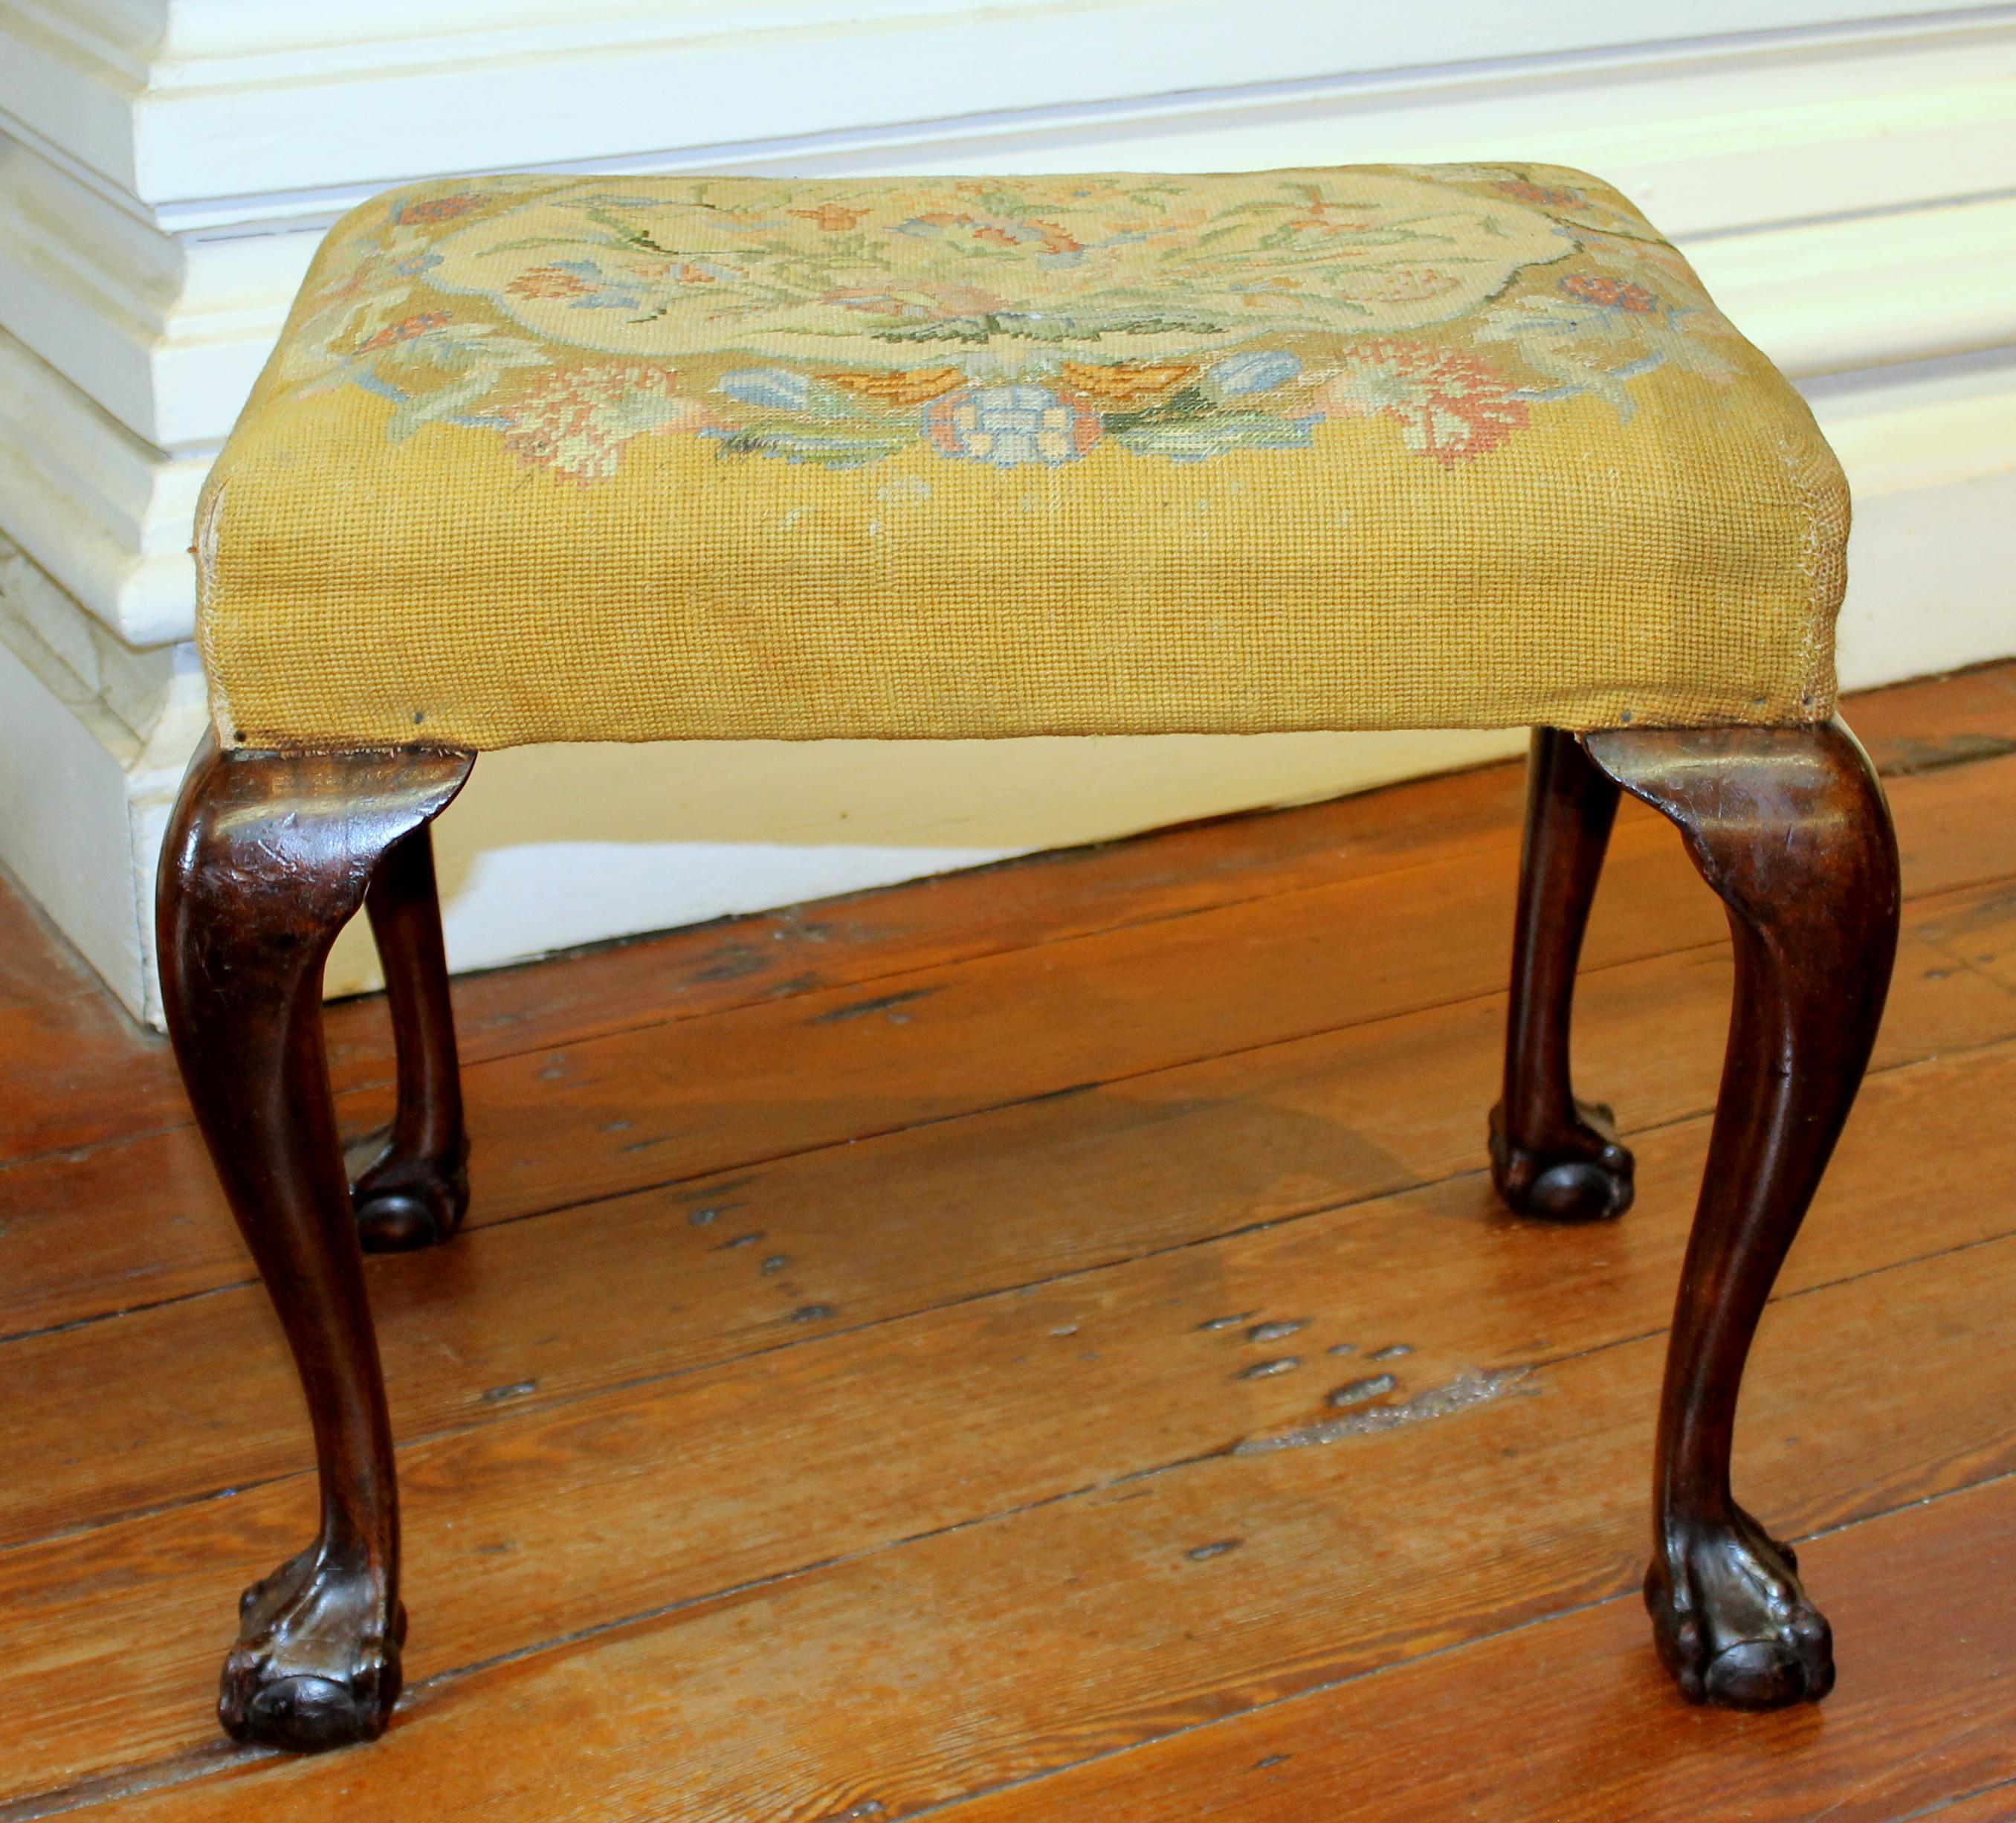 Old English mahogany bench with (possibly original) needlepoint upholstered seat.  

Various slight scratches, bumps and bruises are superficial and can be improved dramatically with some wire wool and wax (which we are happy to perform).